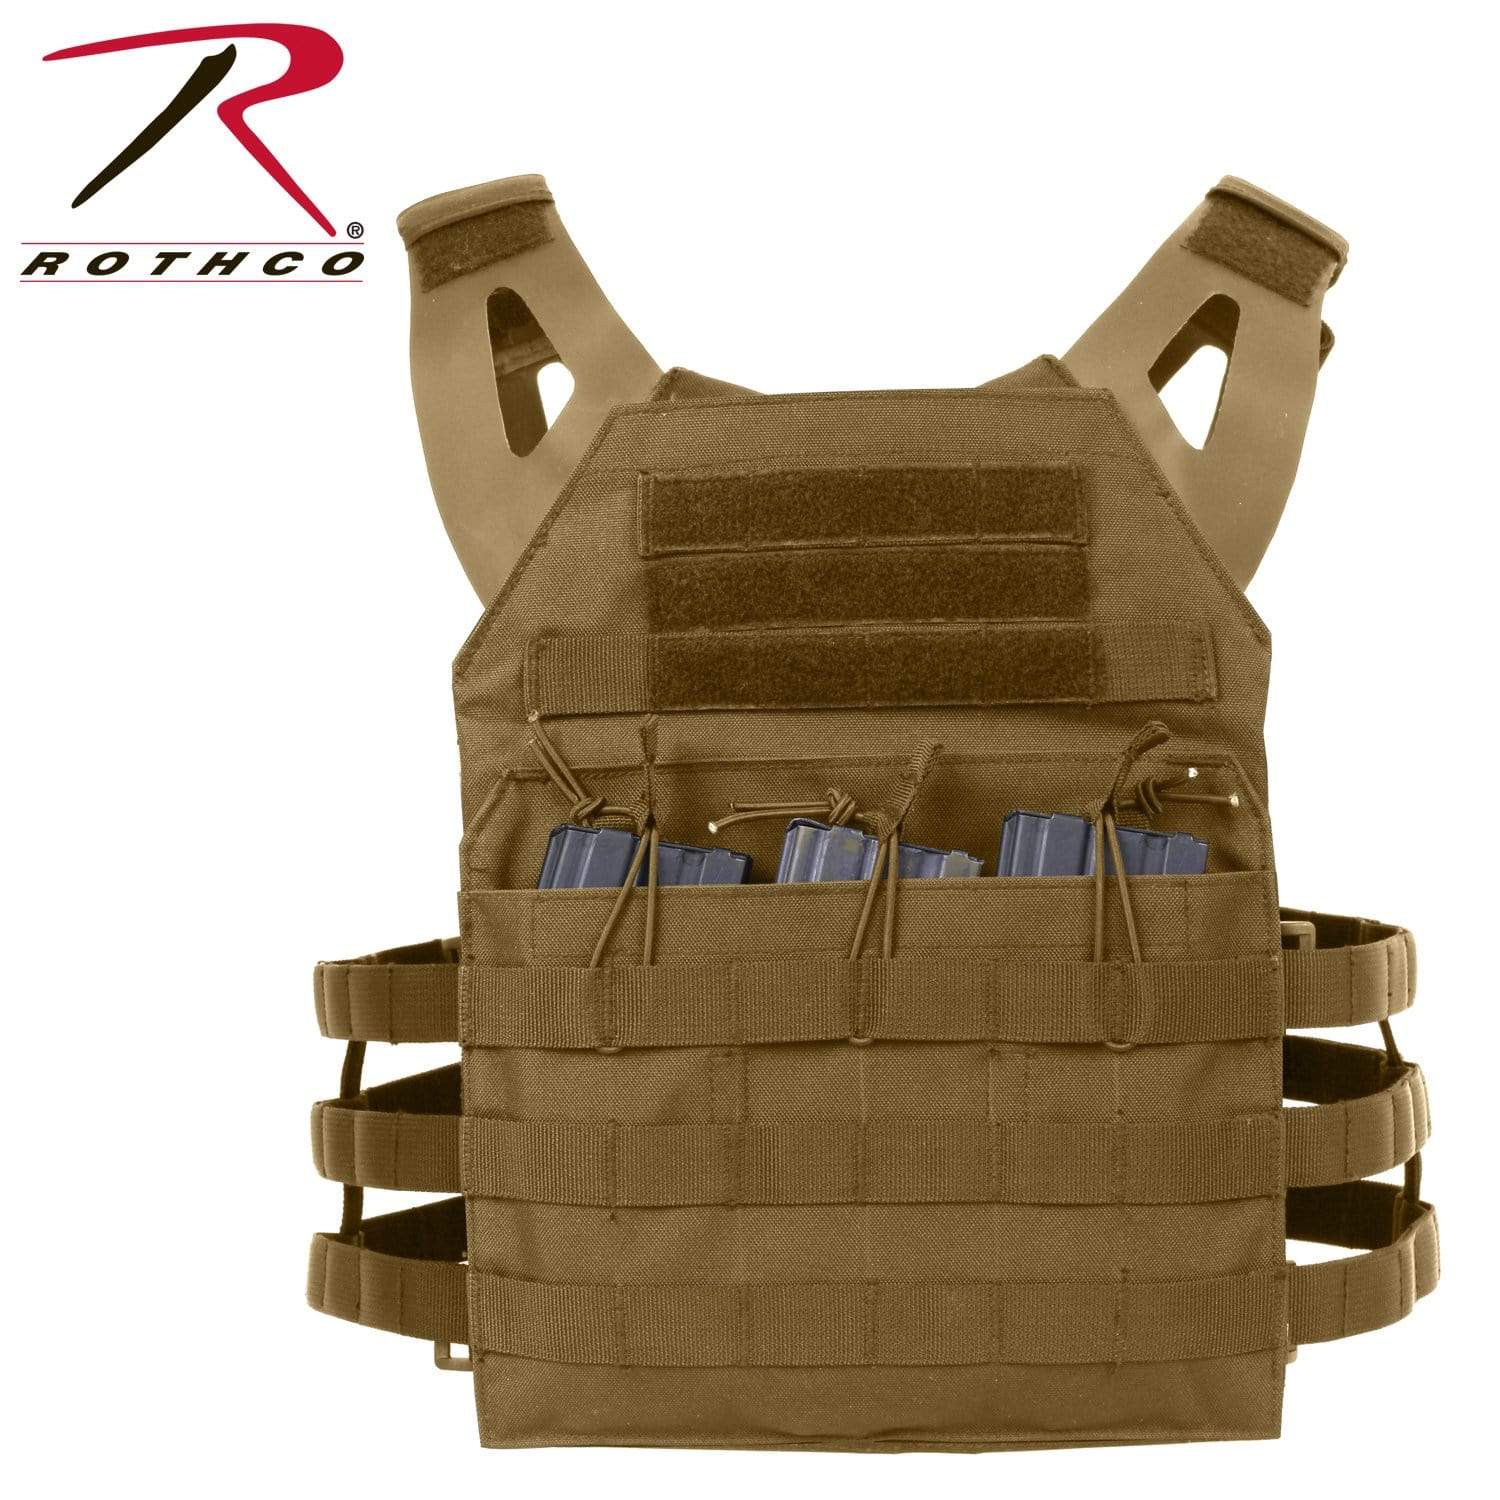 Rothco Lightweight Armor Plate Carrier Vest - Eminent Paintball And Airsoft